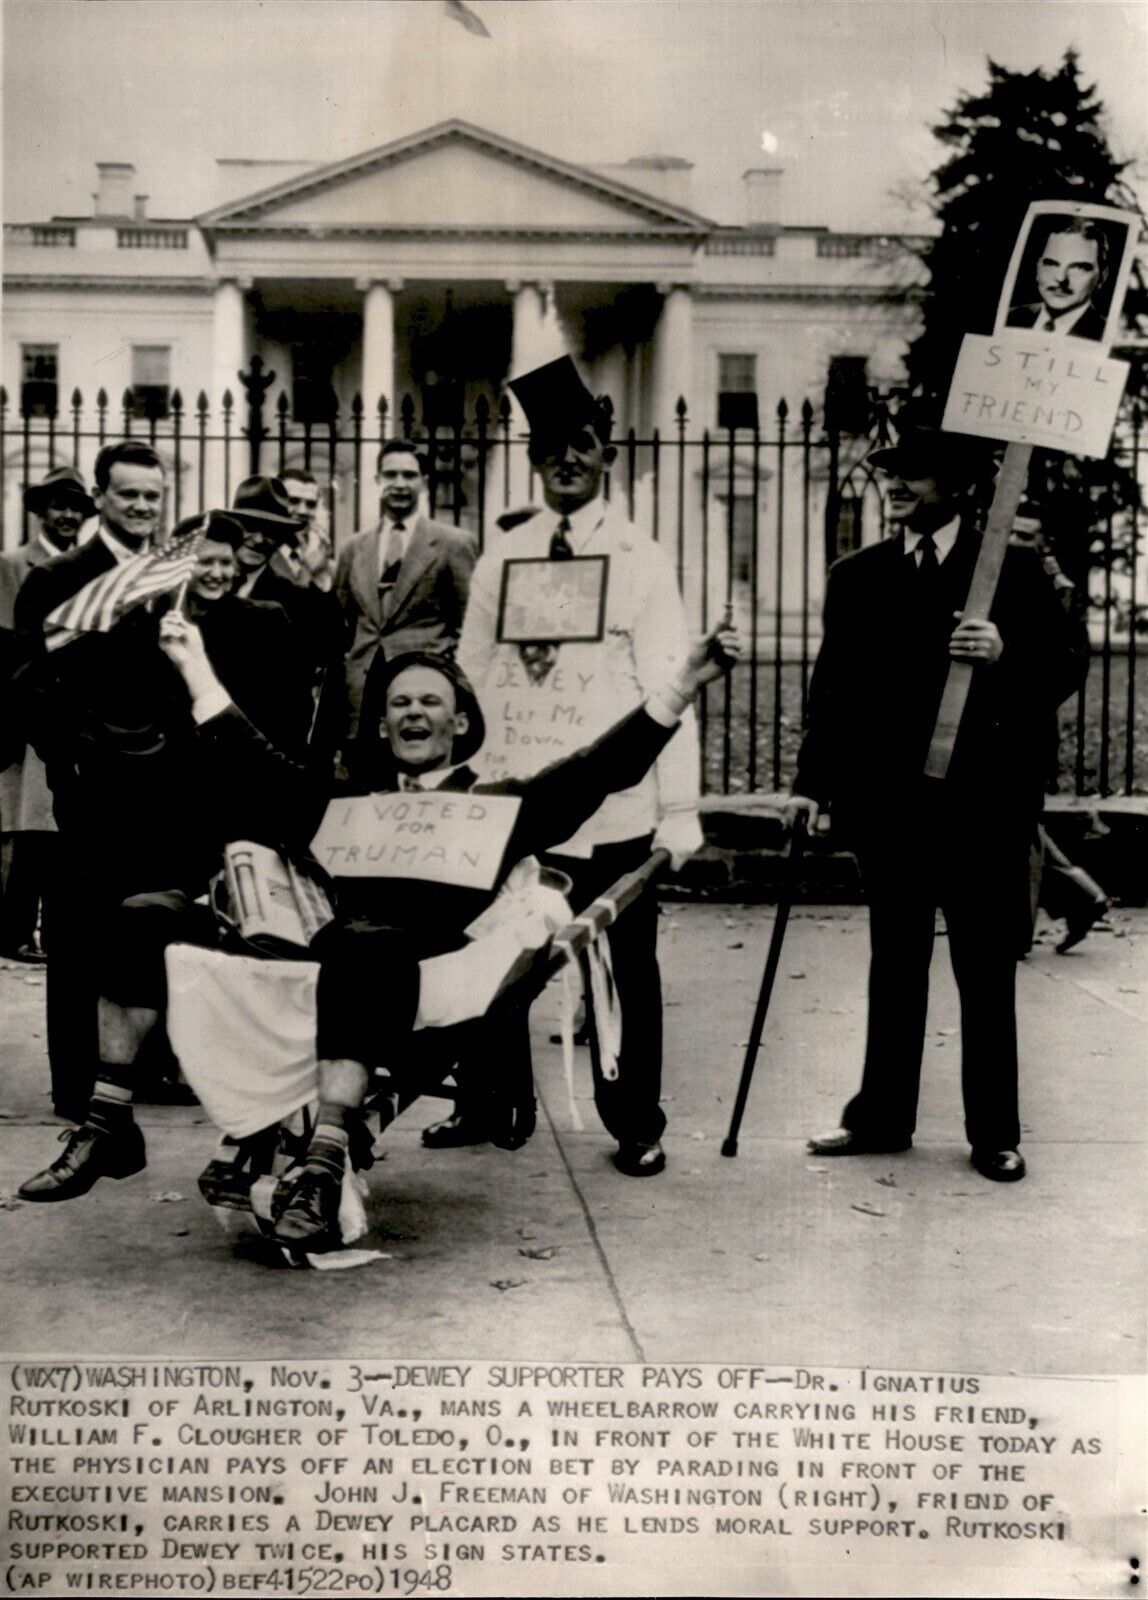 LG2 1948 AP Wire Photo DEWEY SUPPORTER PAYS OFF Wheelchair @ White House Bet